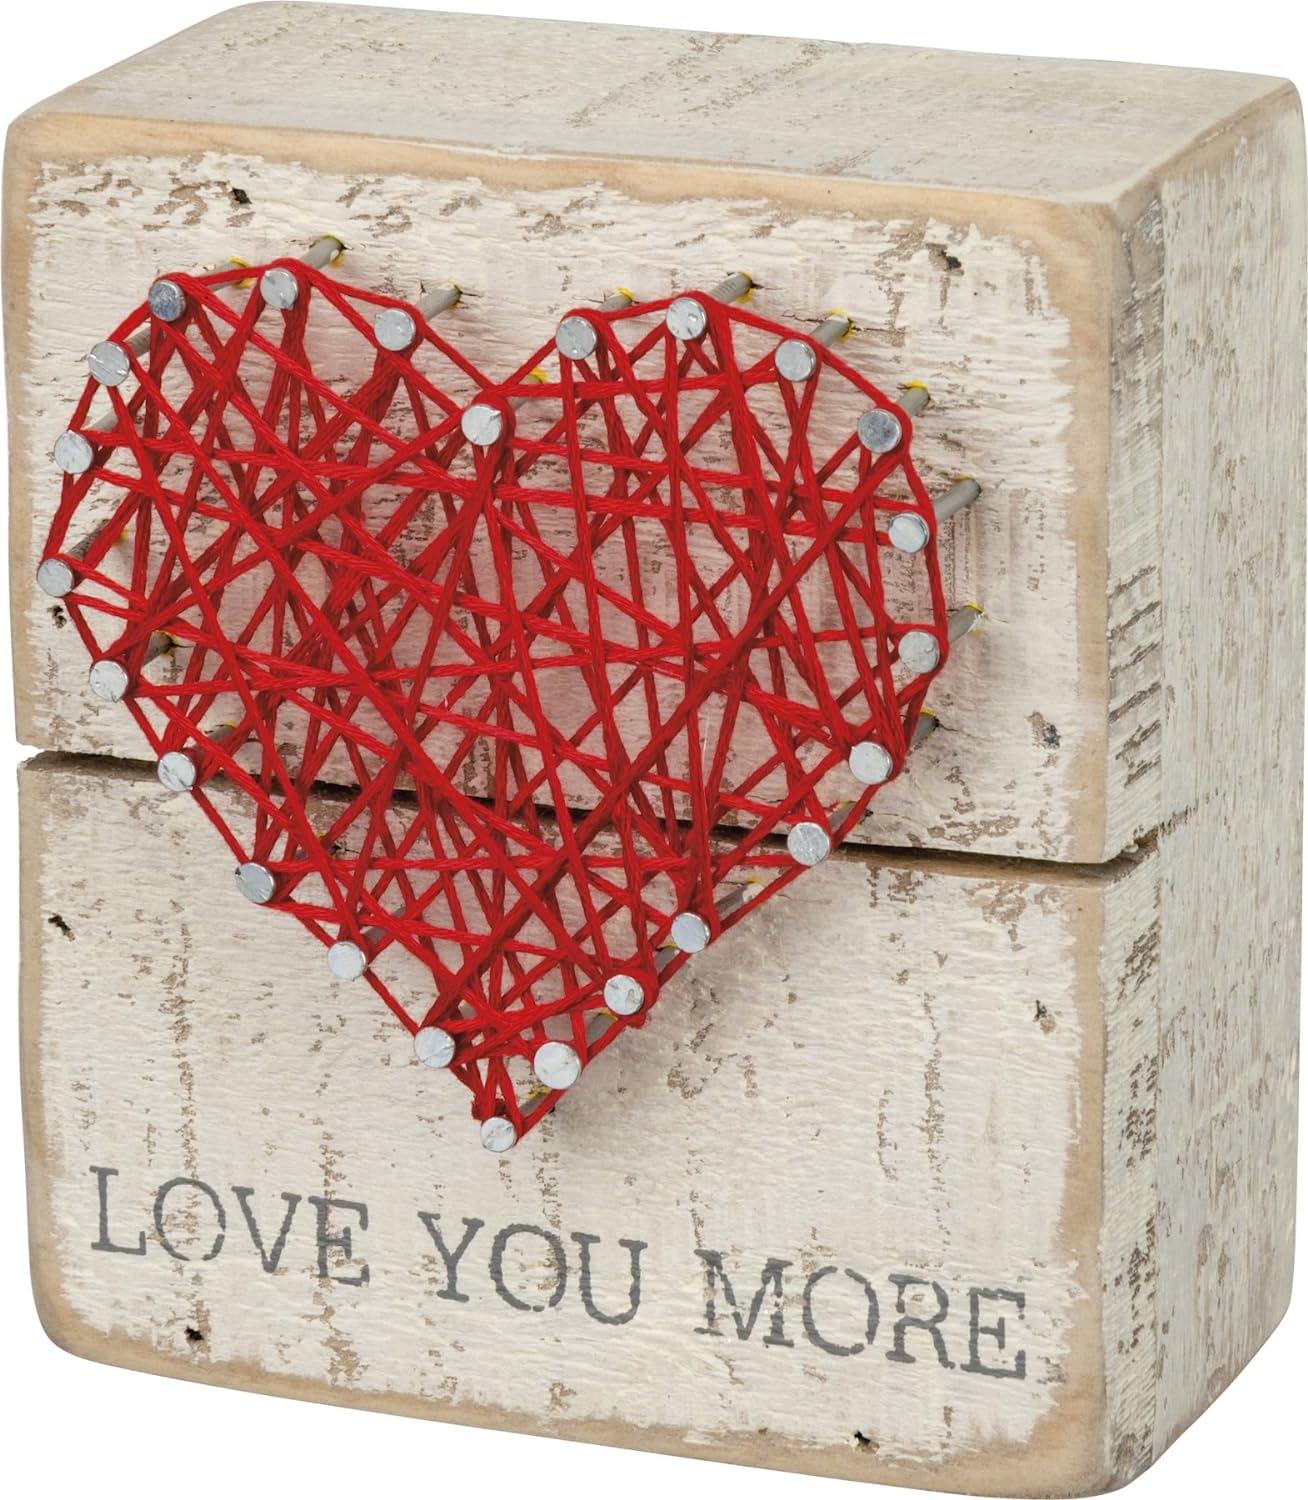 Primitives by Kathy 34248 Rustic White String Art Box Sign, 3.5″ x 4″, Love You More